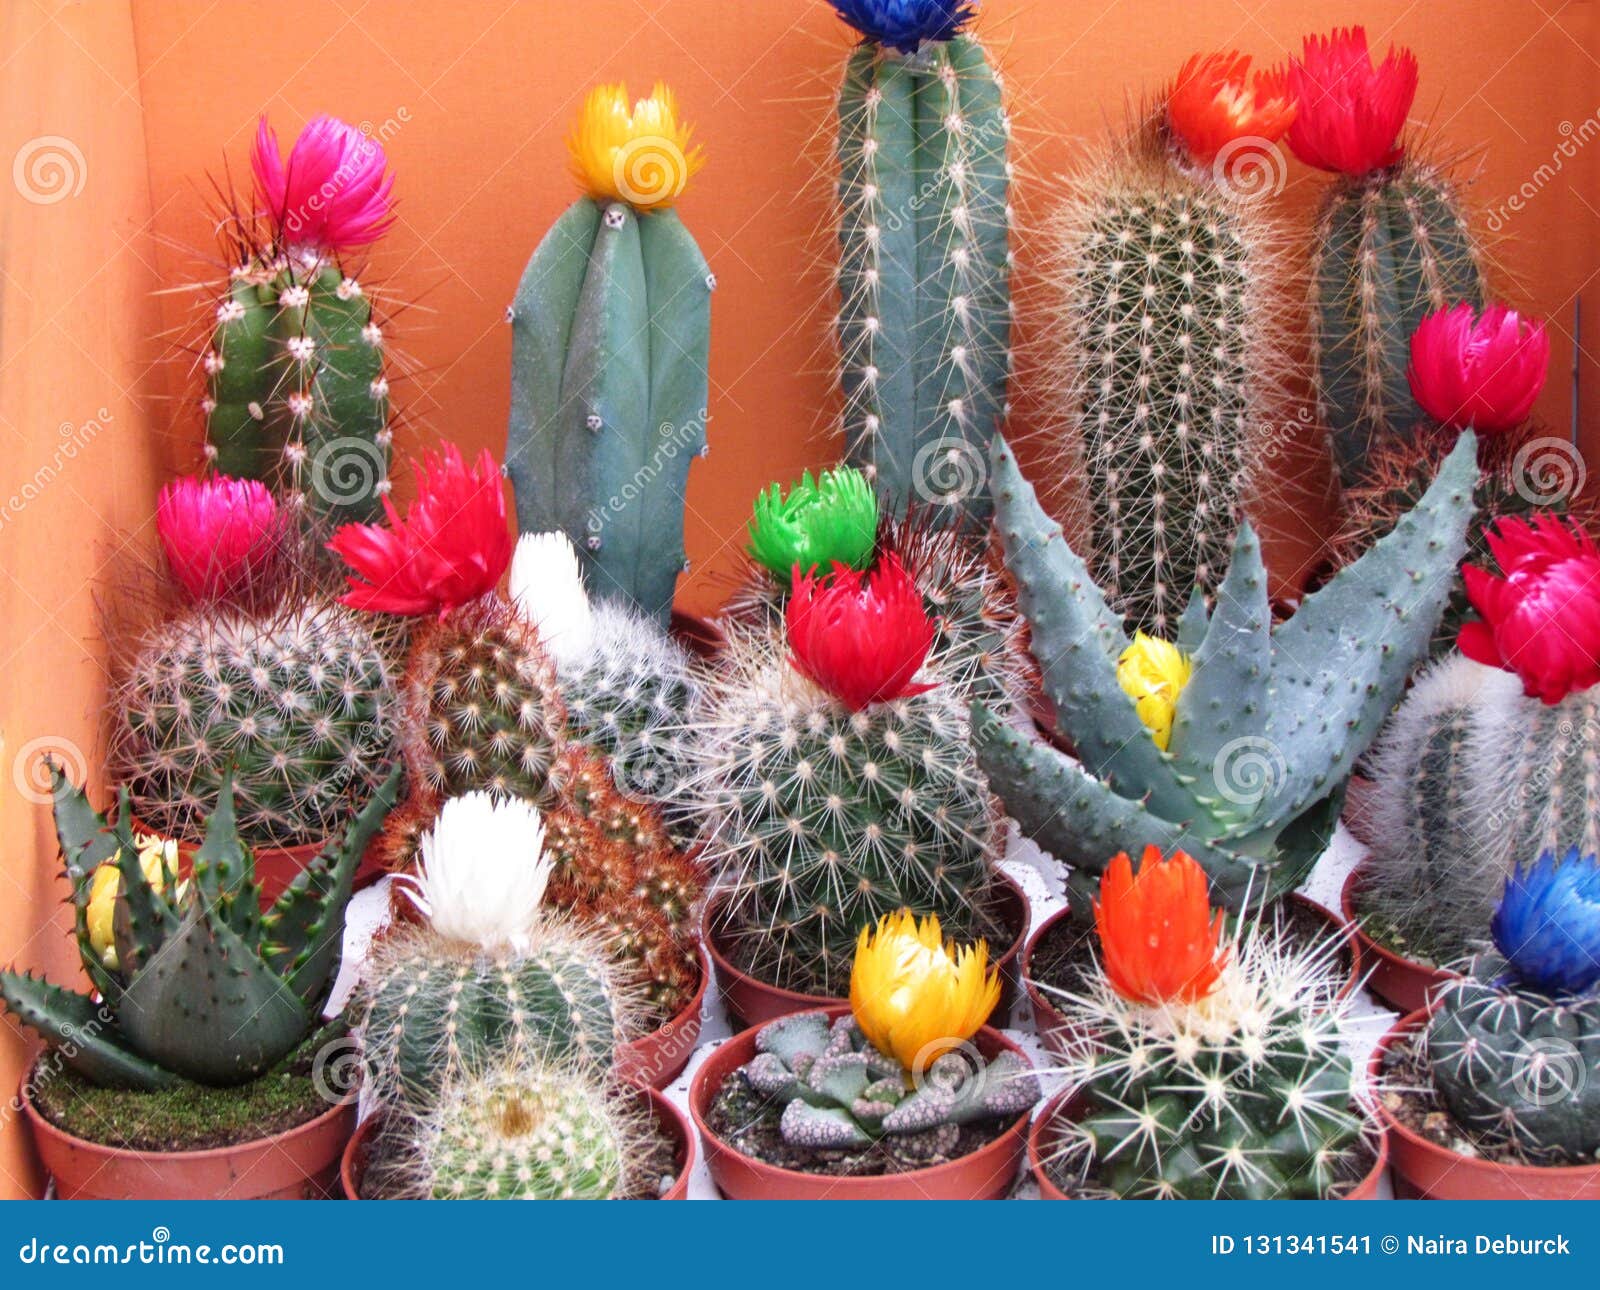 Different Types of Cactus with Colorful Flowers Stock Image - Image of  green, flowers: 131341541